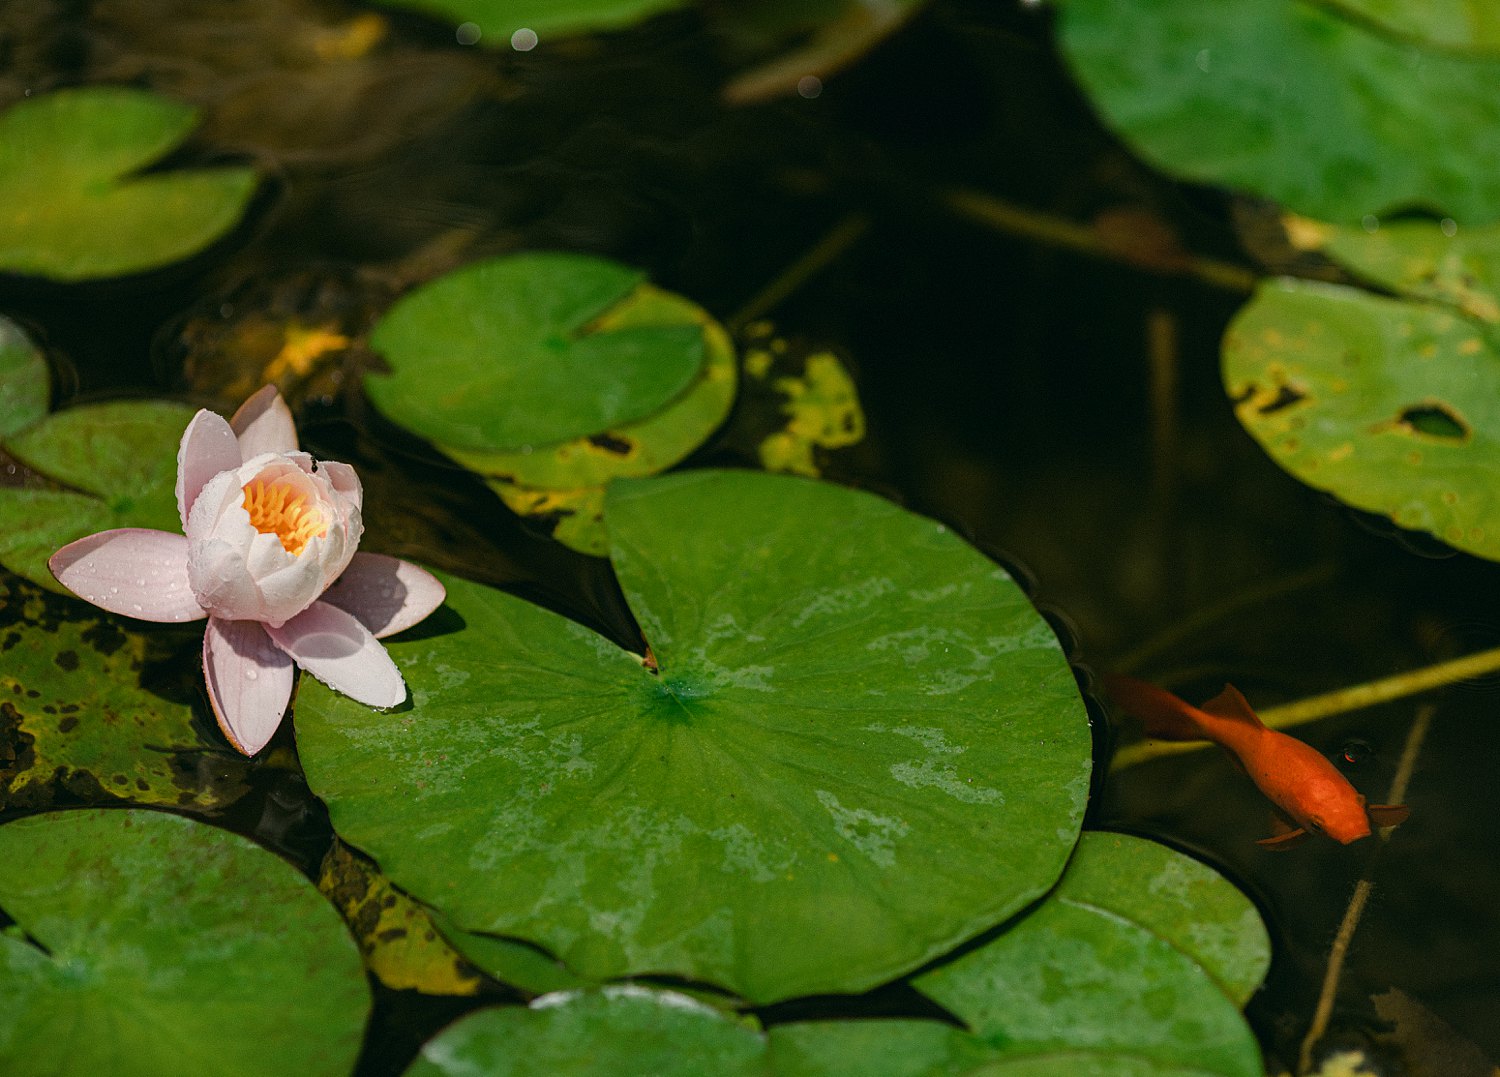 Green lily pads pink flower and orange fish